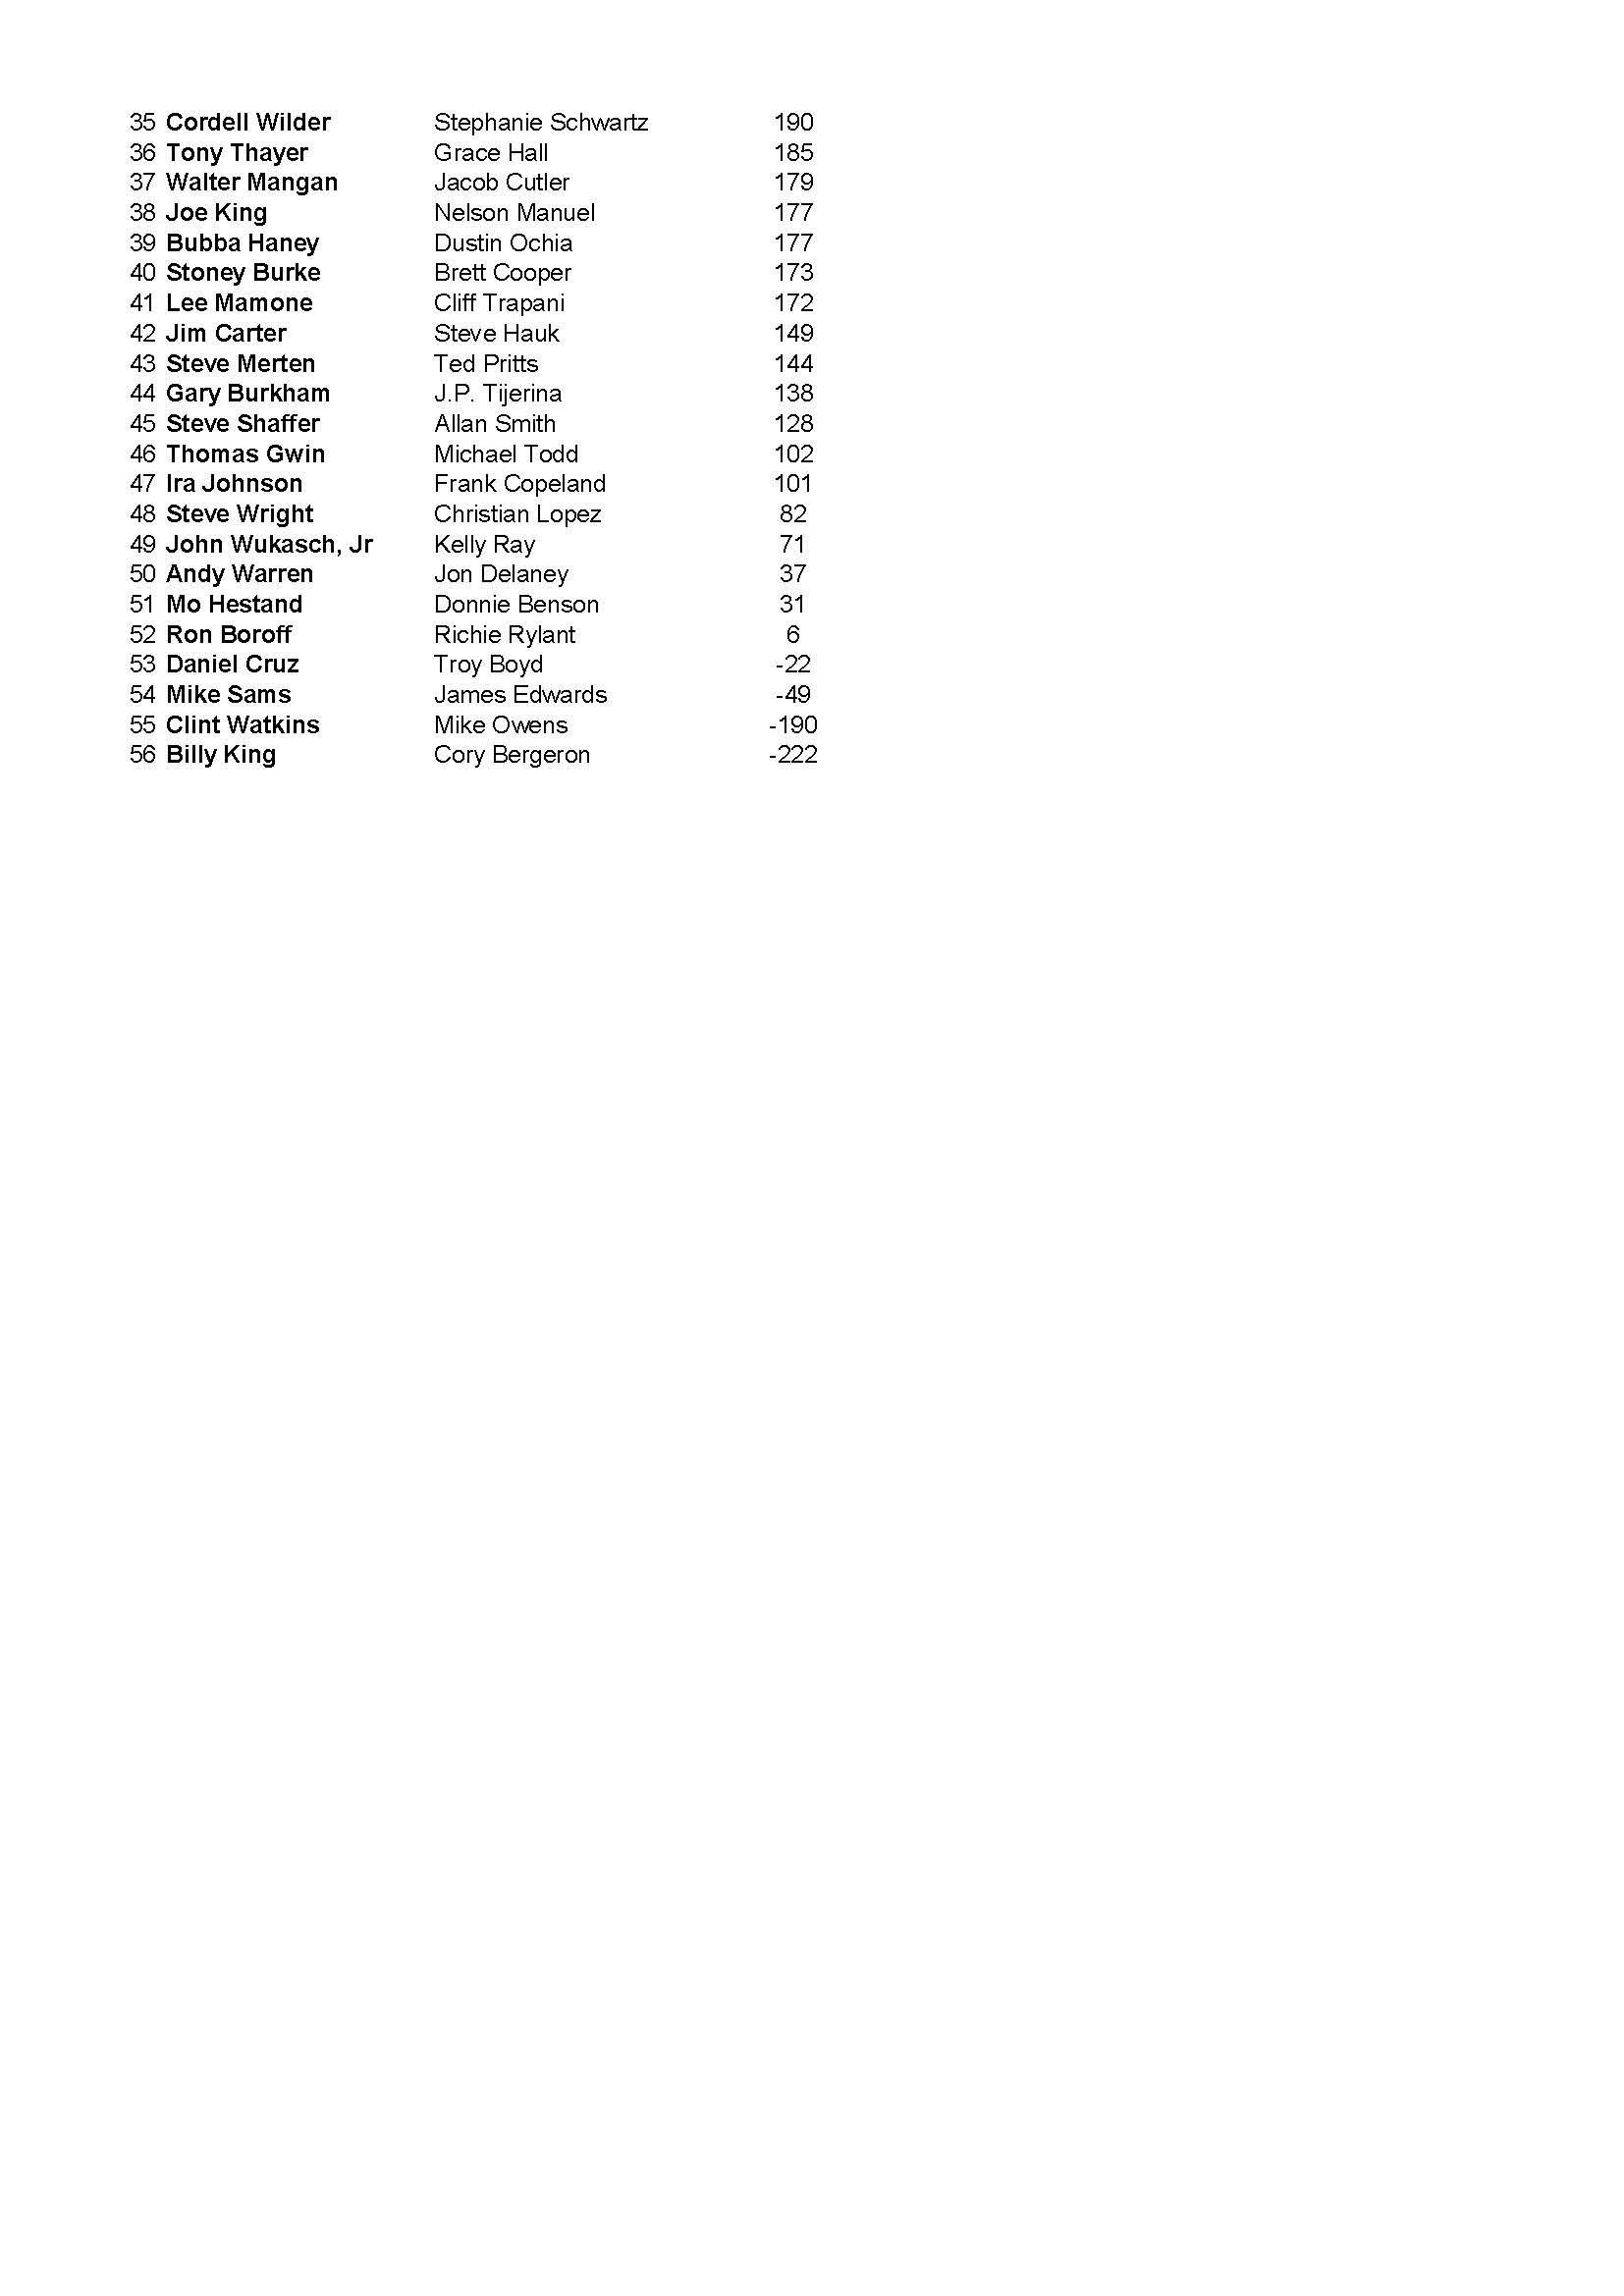 06212020results_Page_2